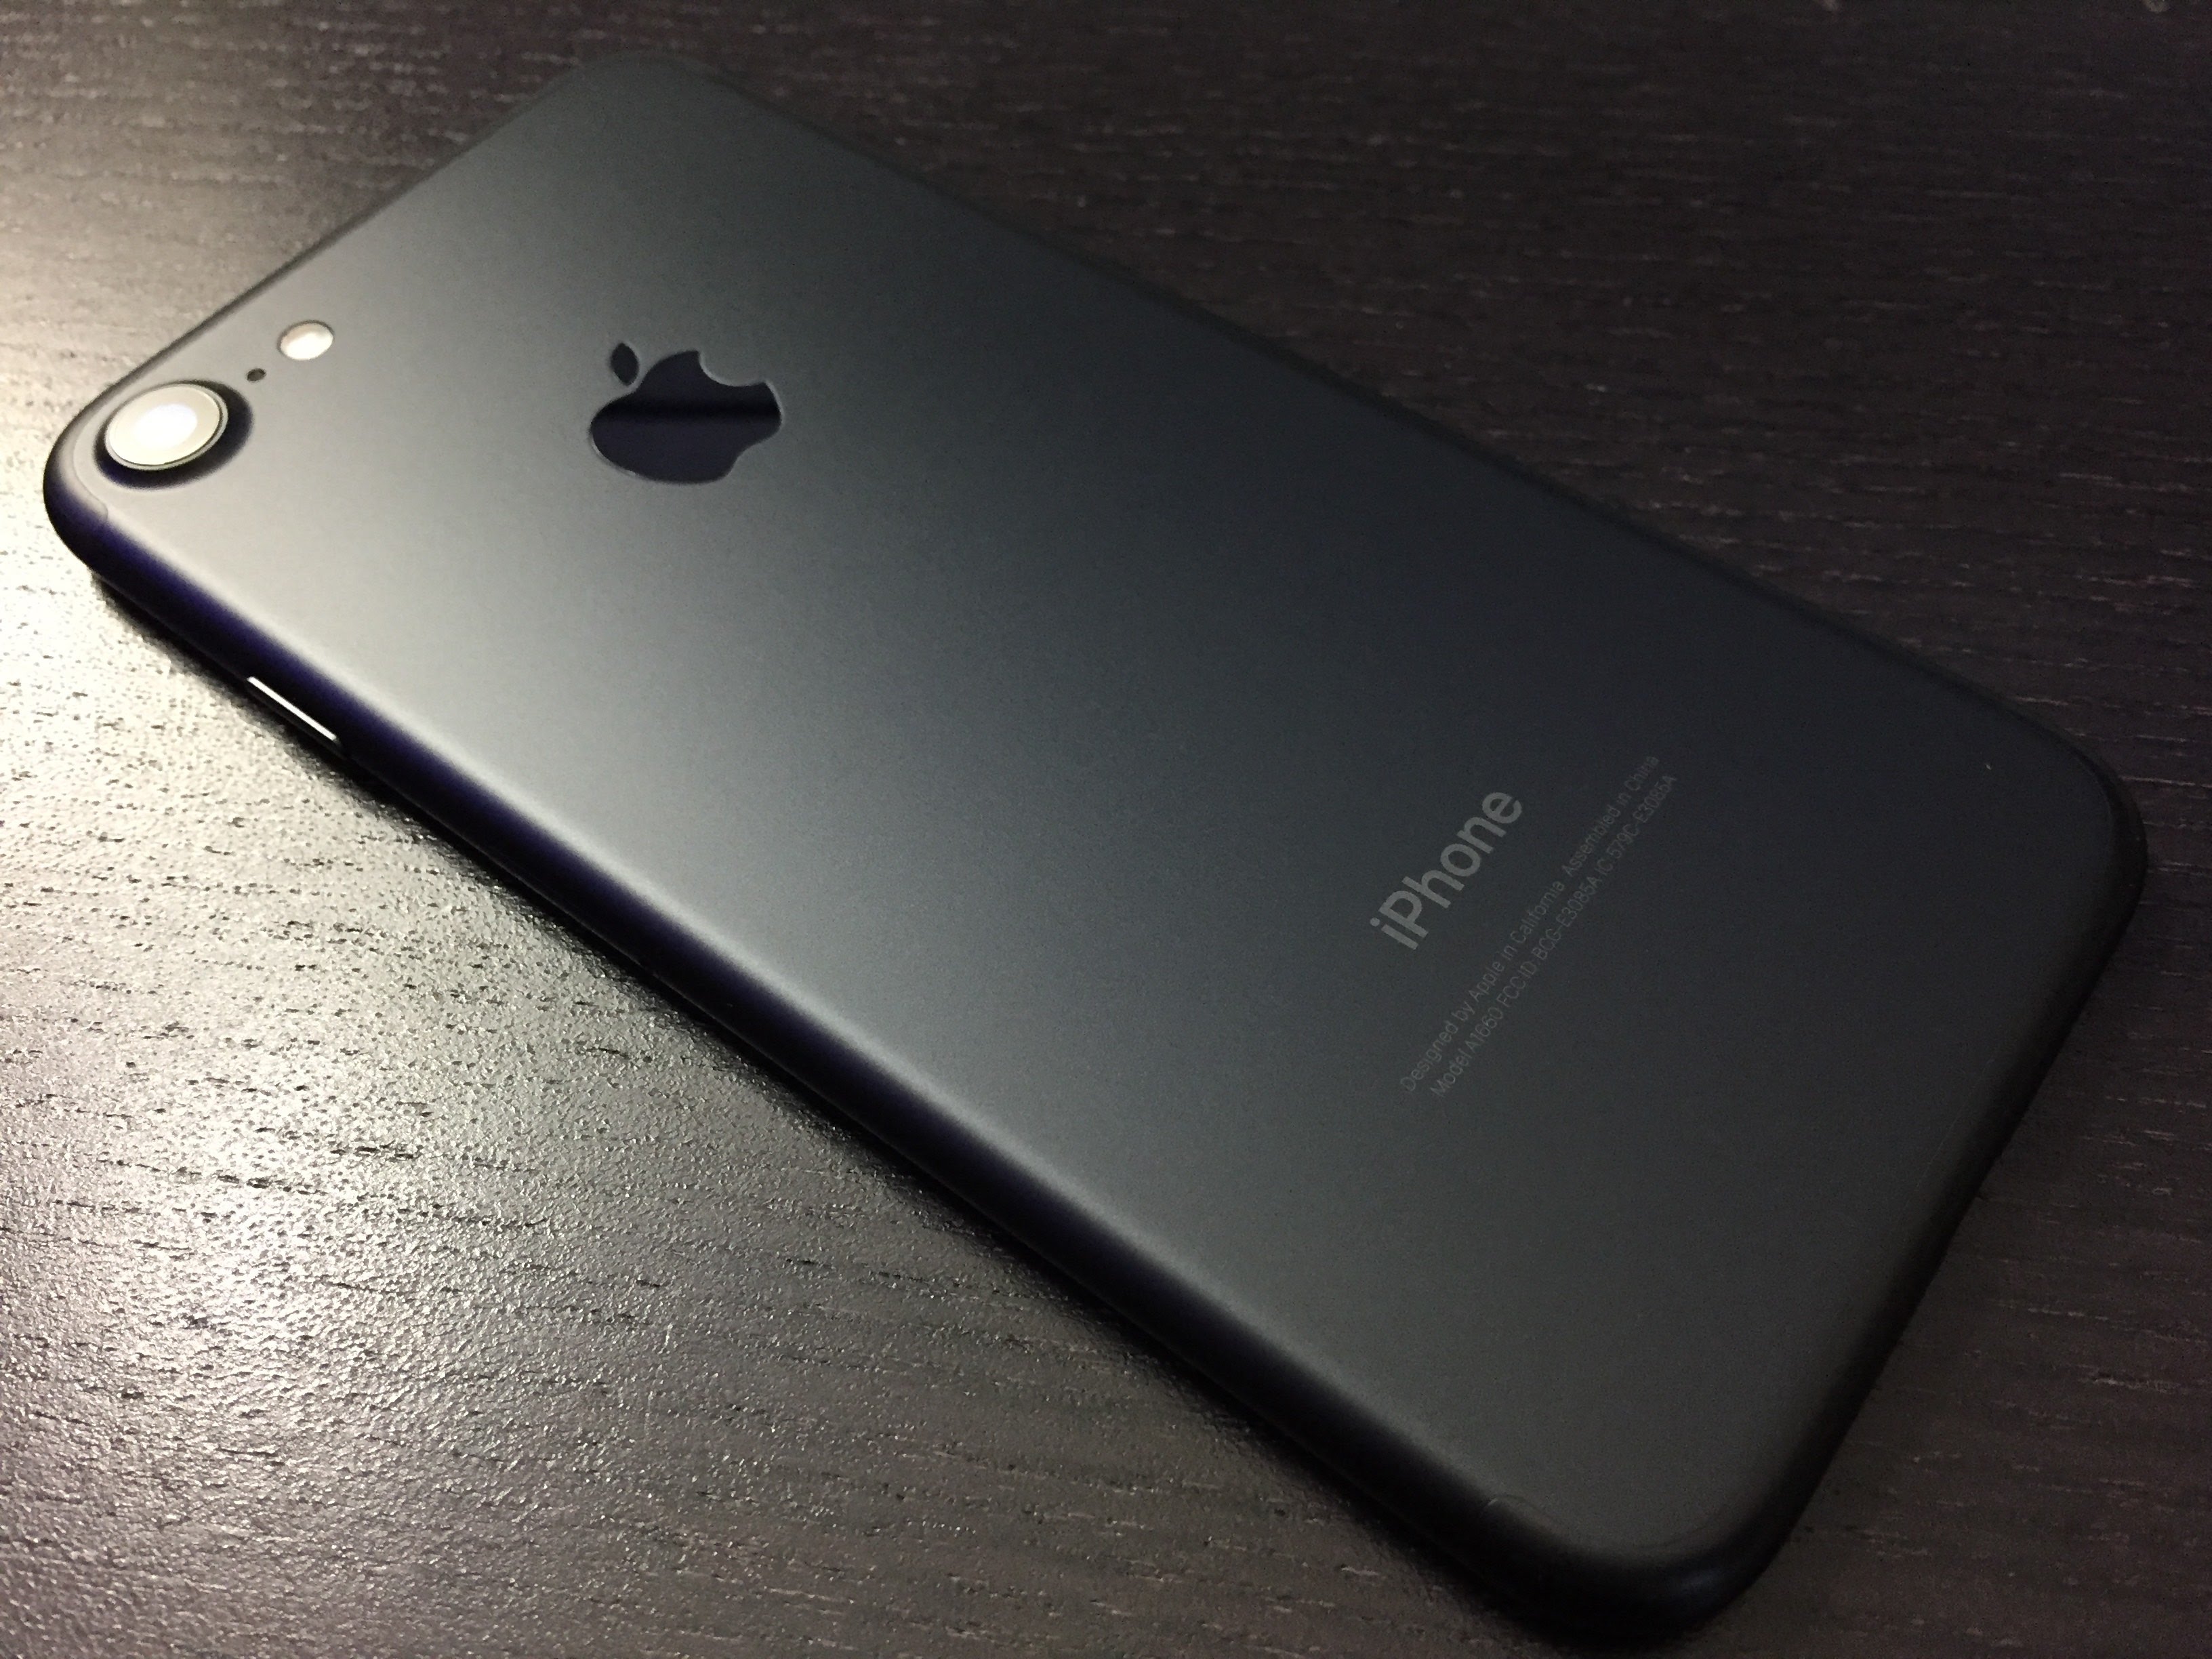 IPHONE 7 UNBOXING (MATTE BLACK) - YouTube